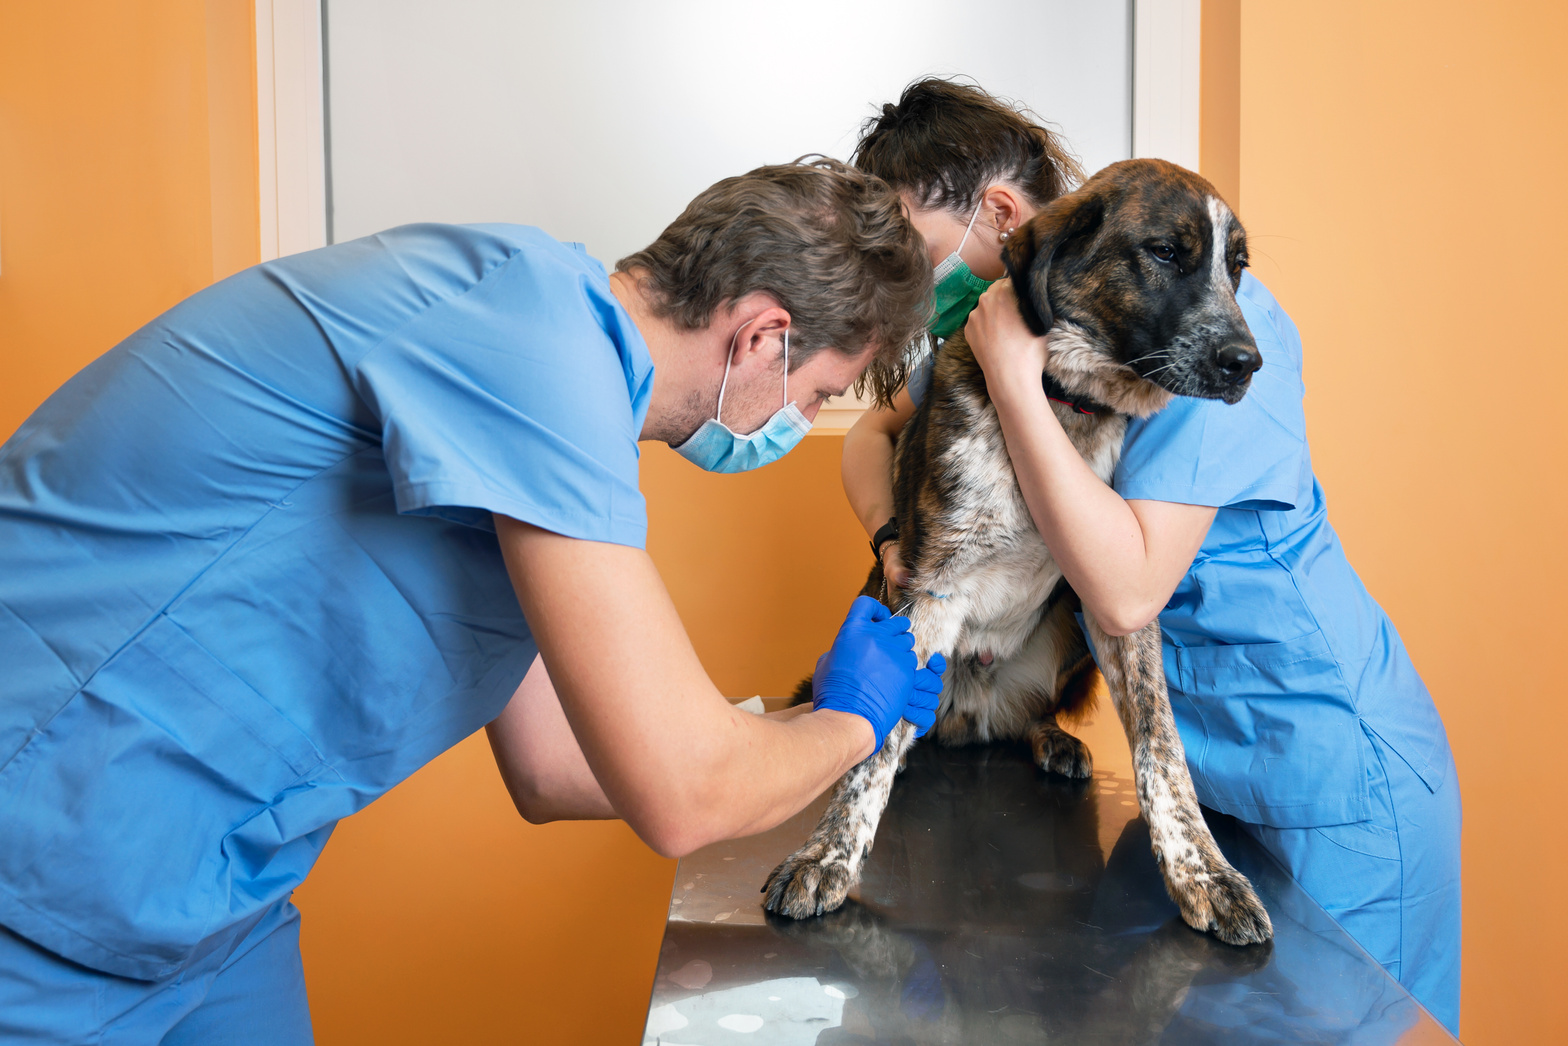 Veterinary Team Bandaging a Paw at Veterinary Clinic